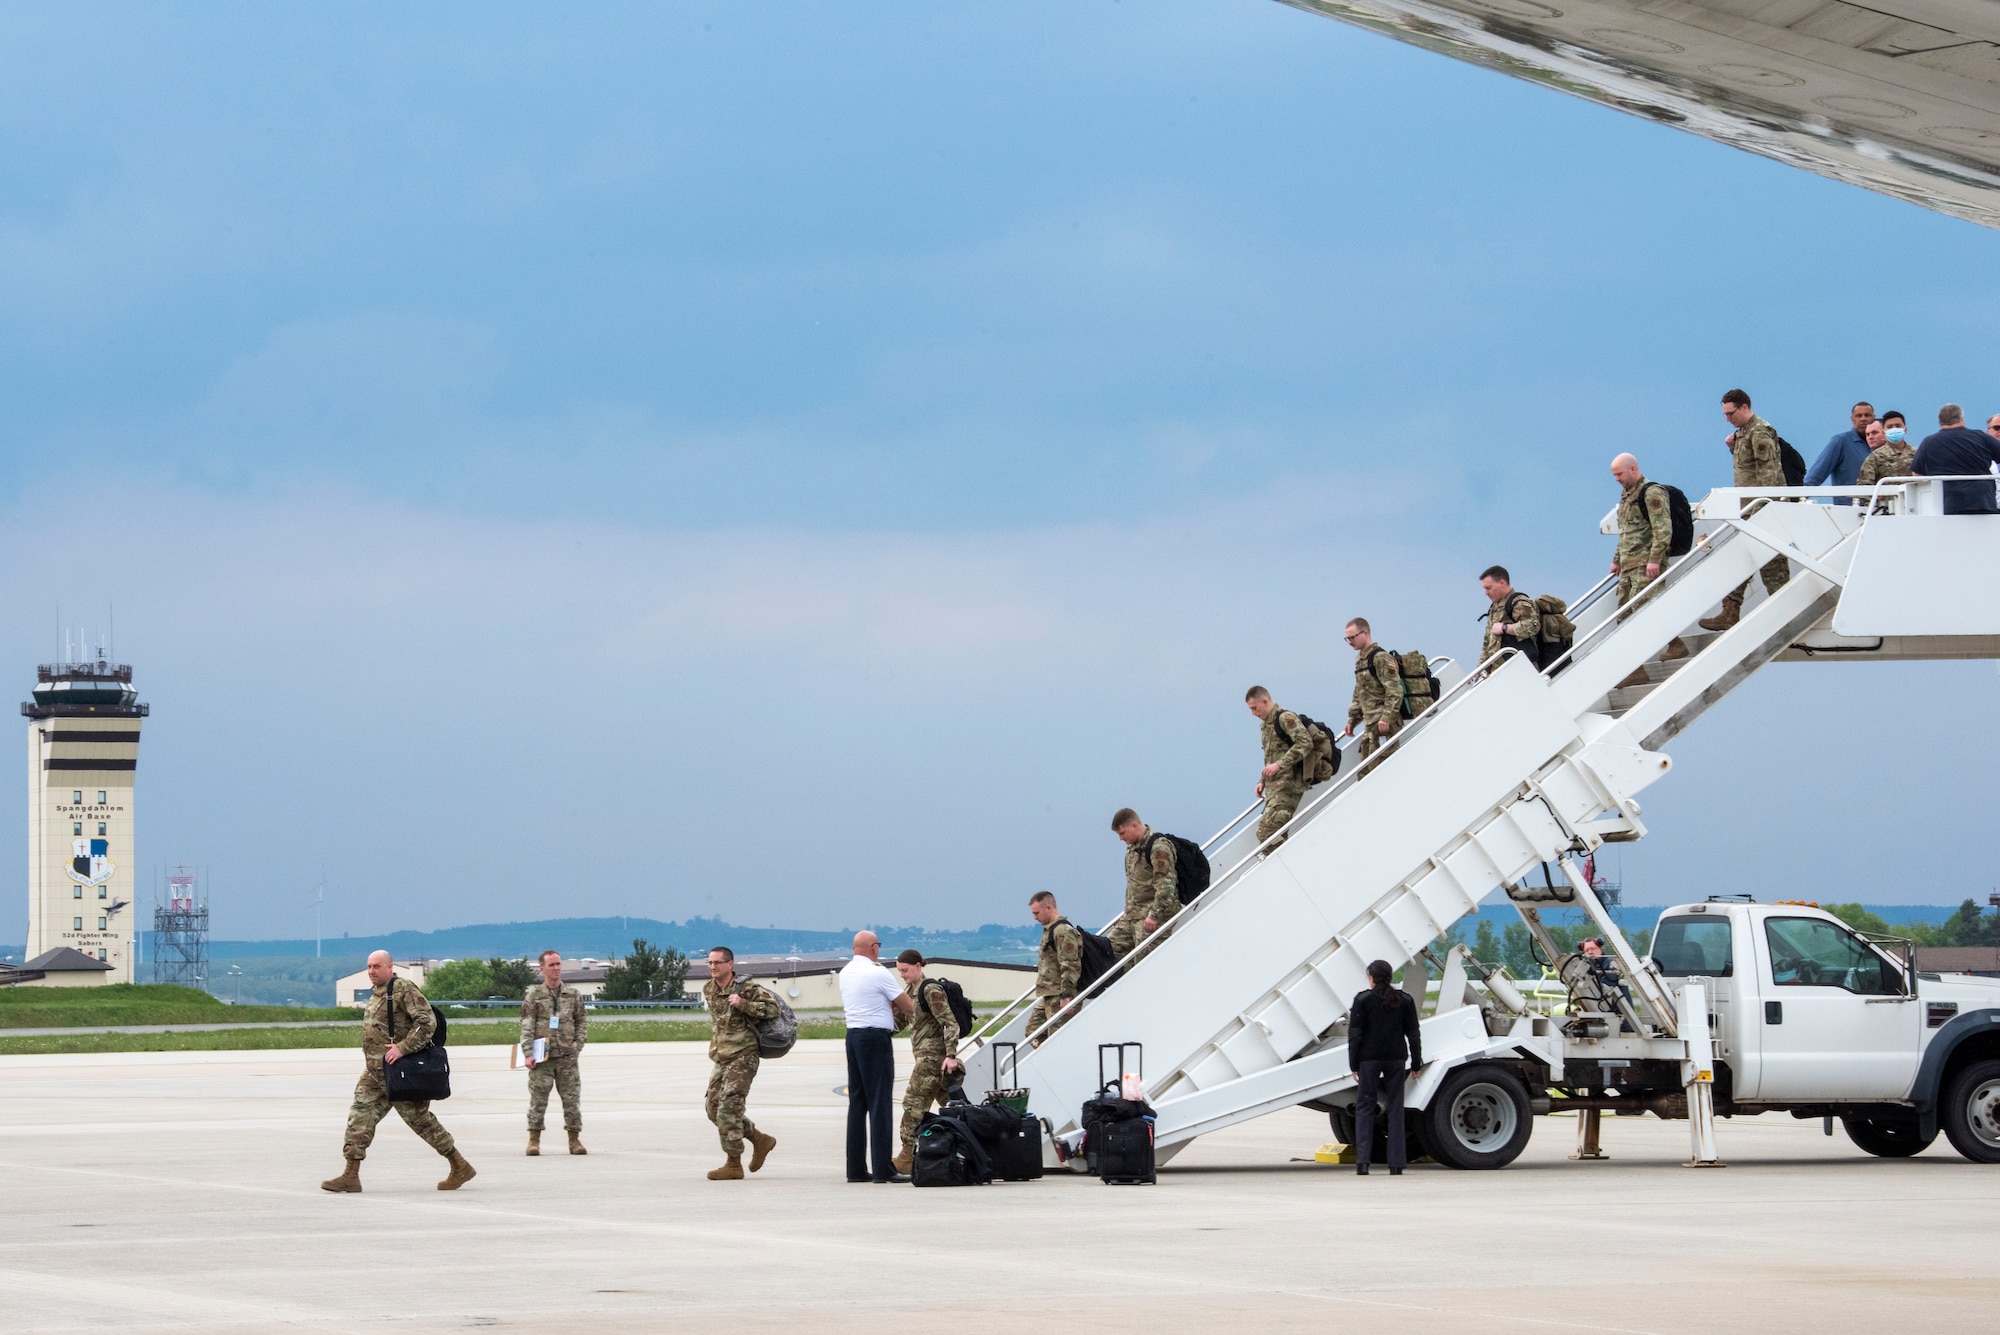 Members from the Vermont Air National Guard’s 158th Fighter Wing arrive at Spangdahlem Air Base, Germany, April 29, 2022. As part of NATO’s plan to bolster its collective defense posture, the 158th FW will take over the mission for Hill Air Force Base’s 388th Fighter Wing. (U.S. Air Force photo Airman 1st Class Marcus Hardy-Bannerman)